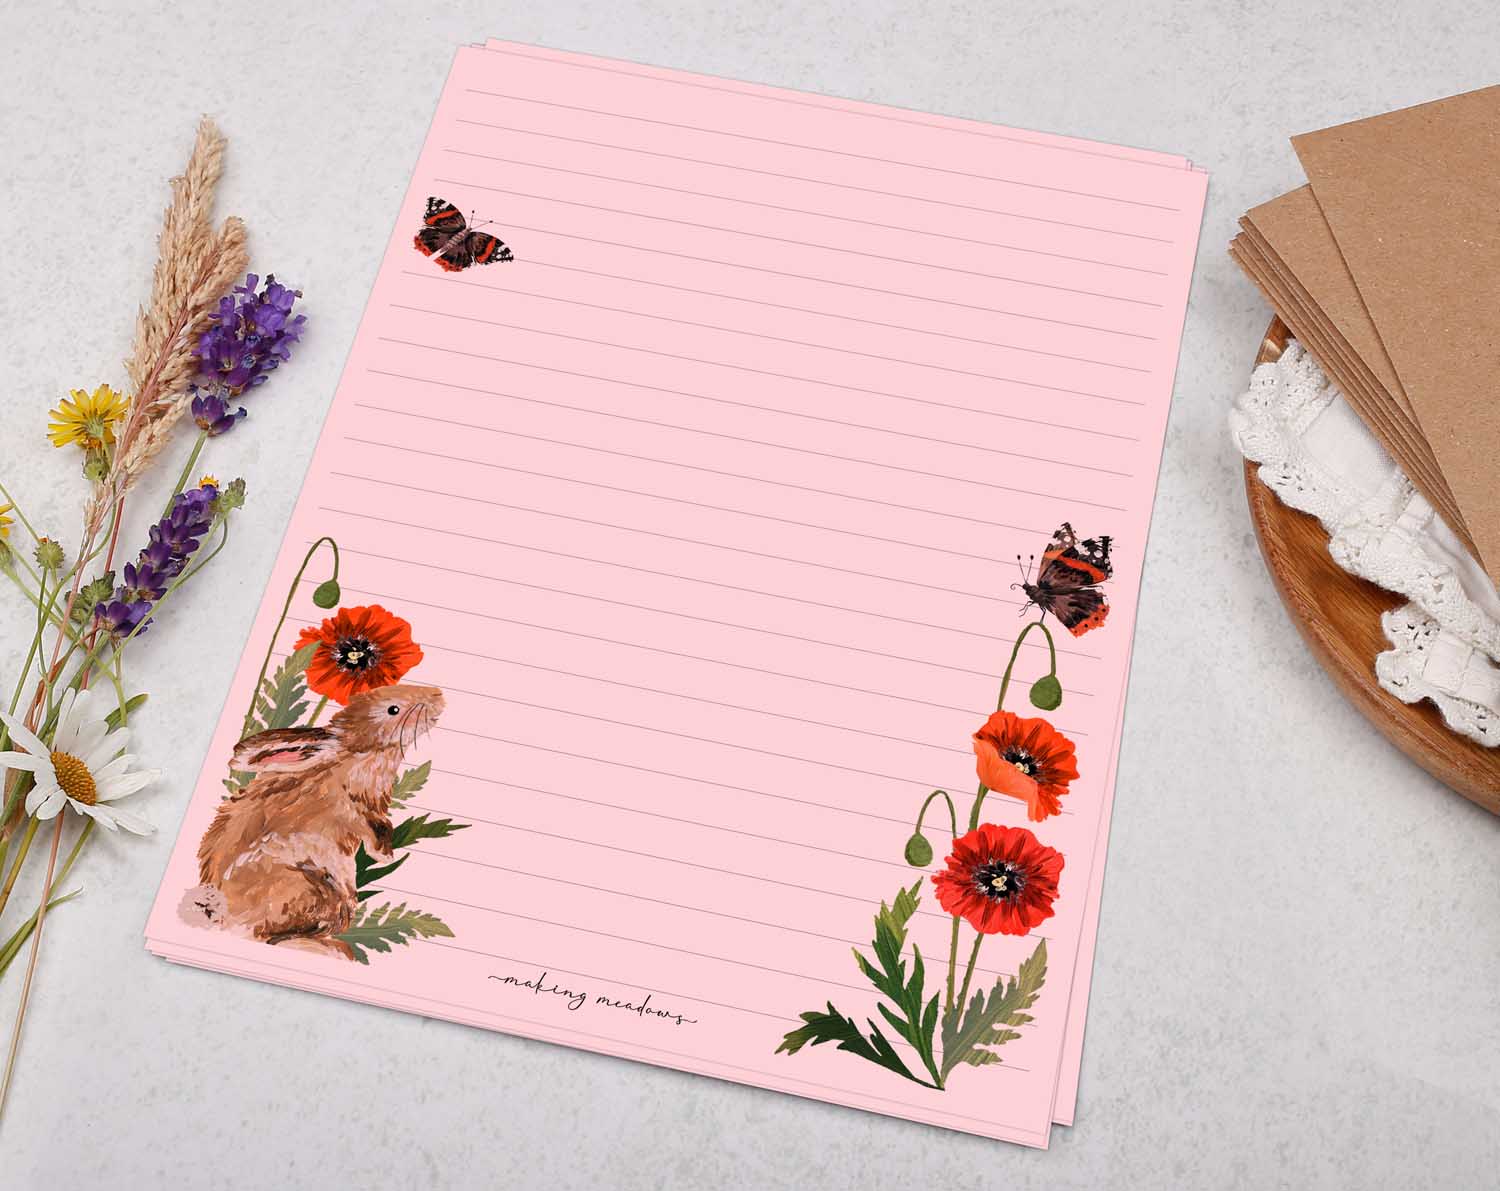 Pink A5 letter writing paper sheets with bunny rabbit and poppy design.